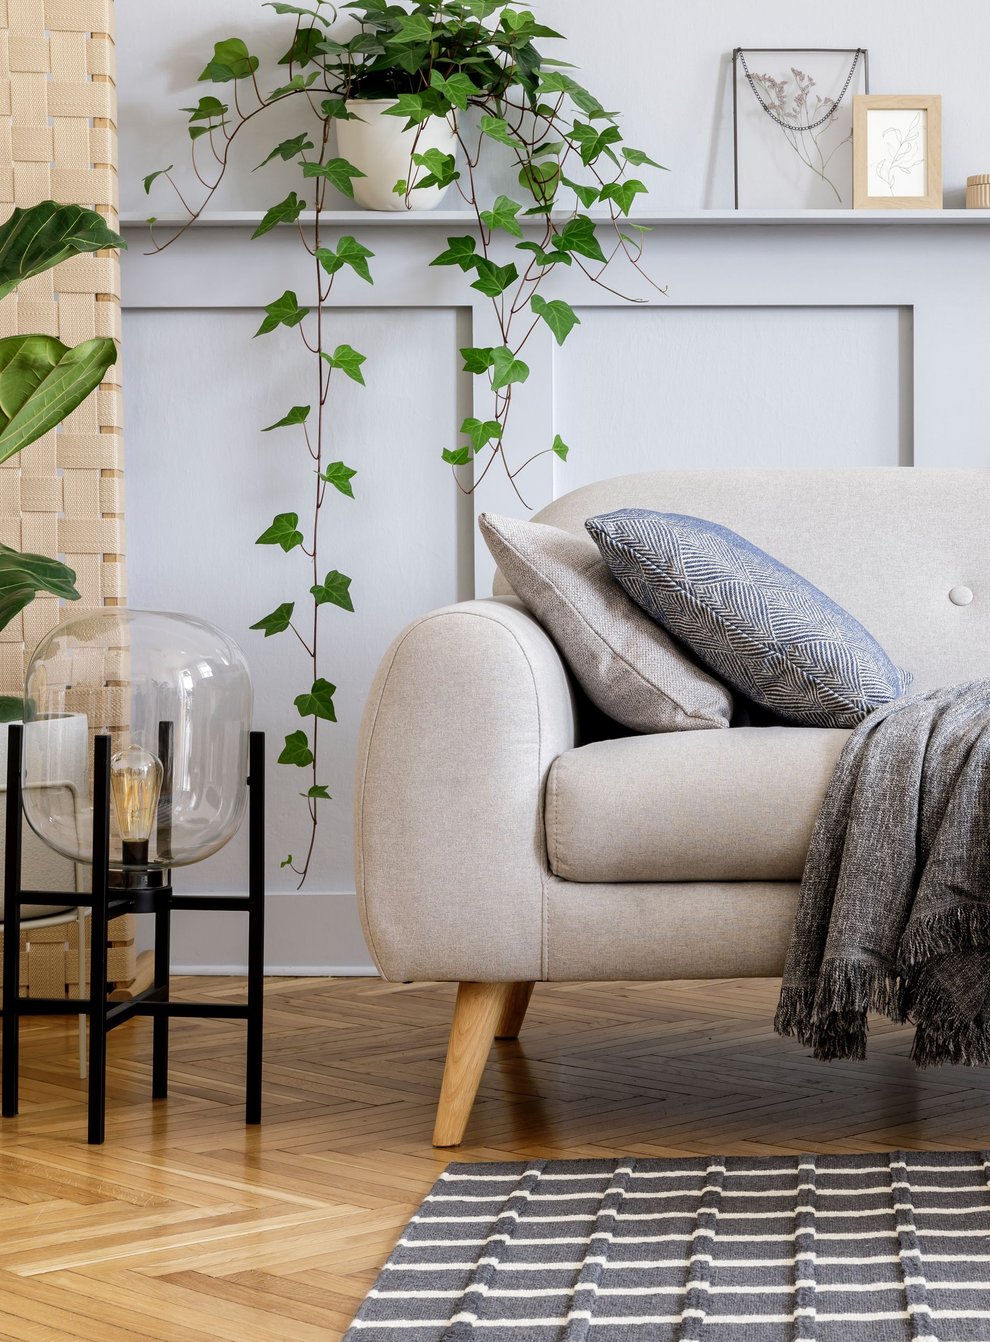 Stylish scandi-style living room in neutral colours (iStock/PA)